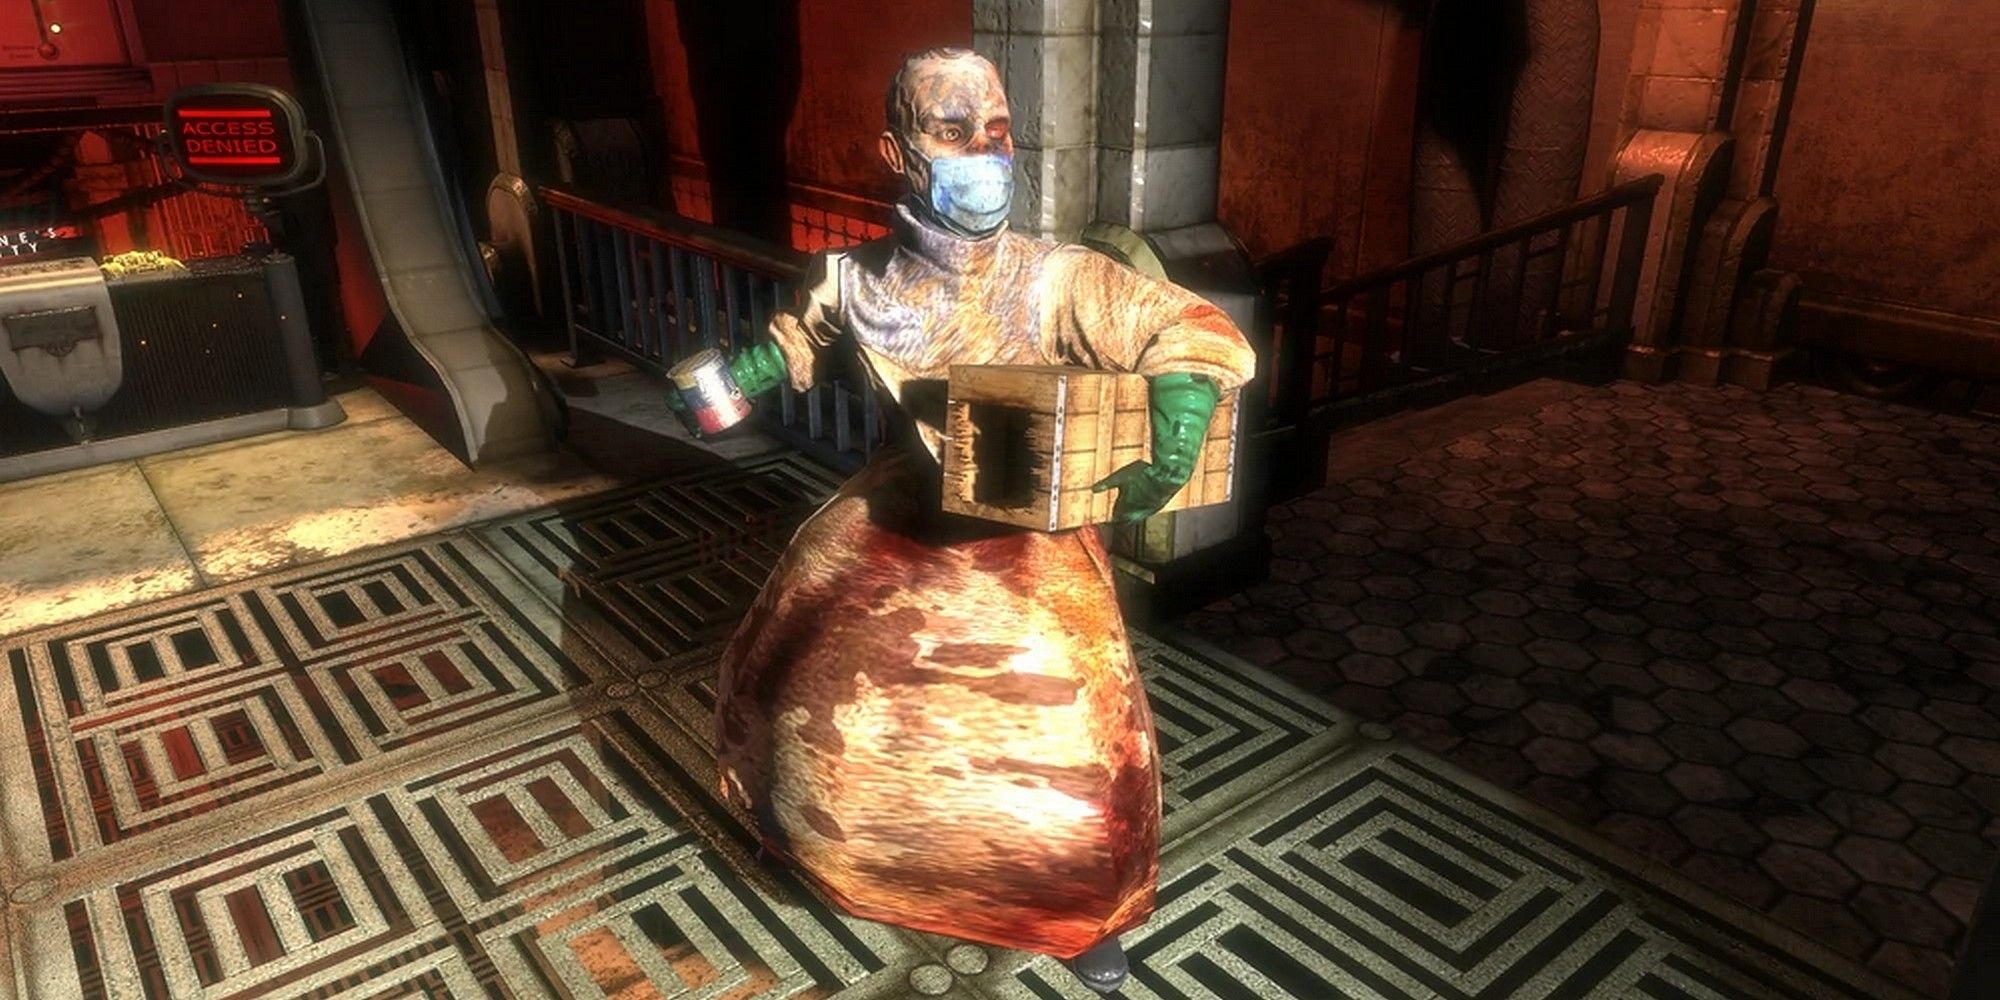 A Nitro Splicer from BioShock, dressed in medical clothing carrying grenades